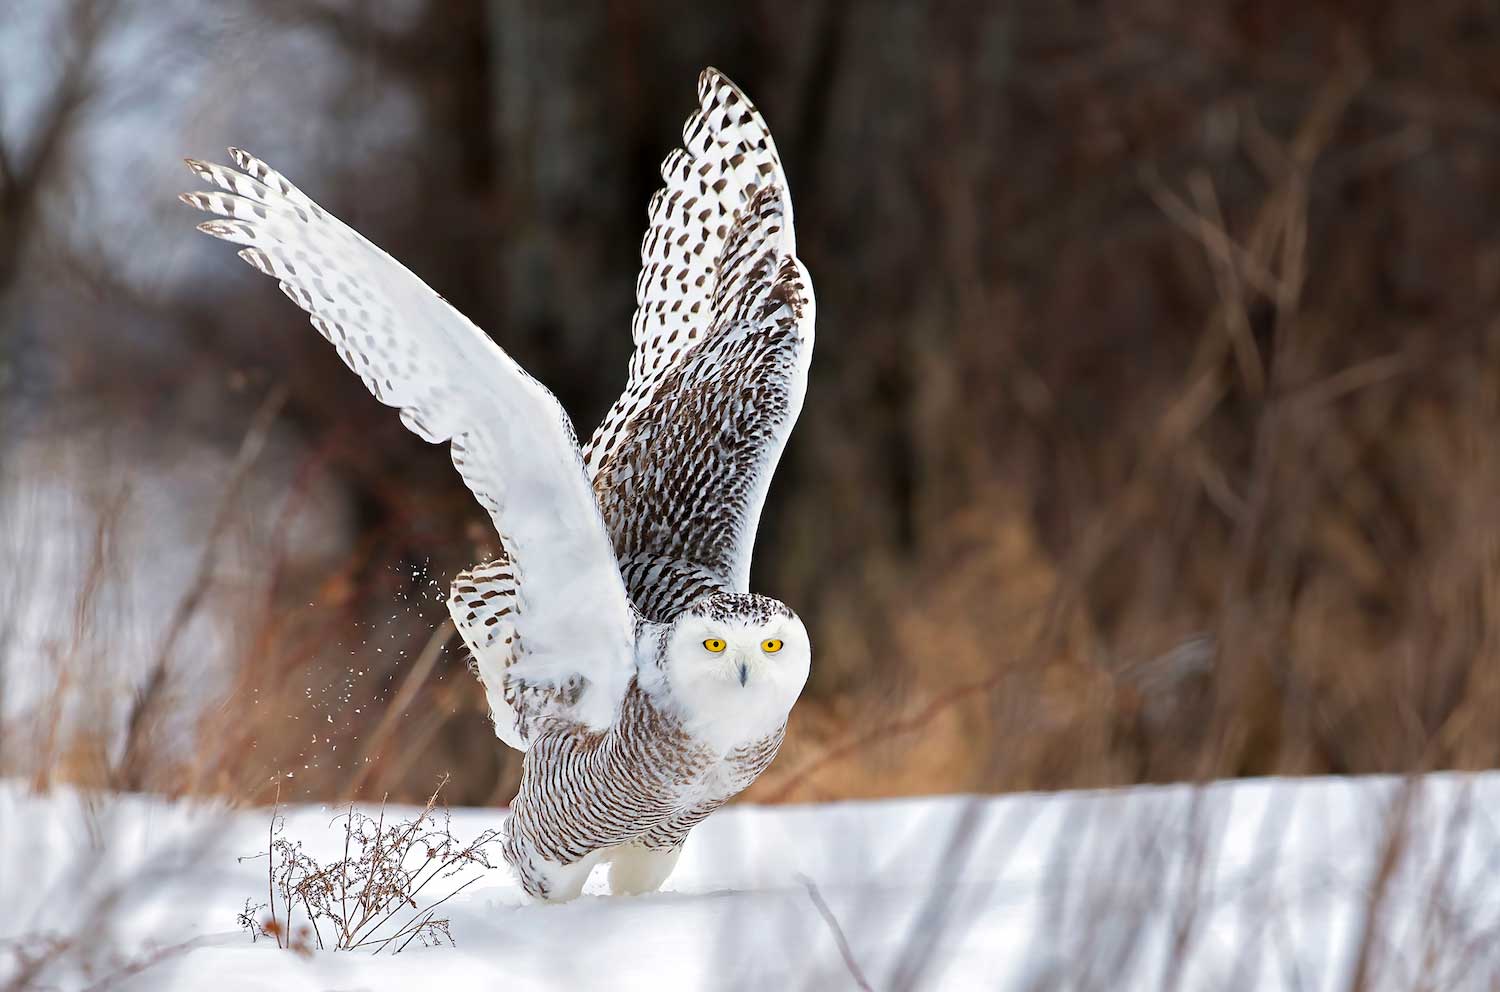 A snowy owl with wings outstretched on the snowy ground.